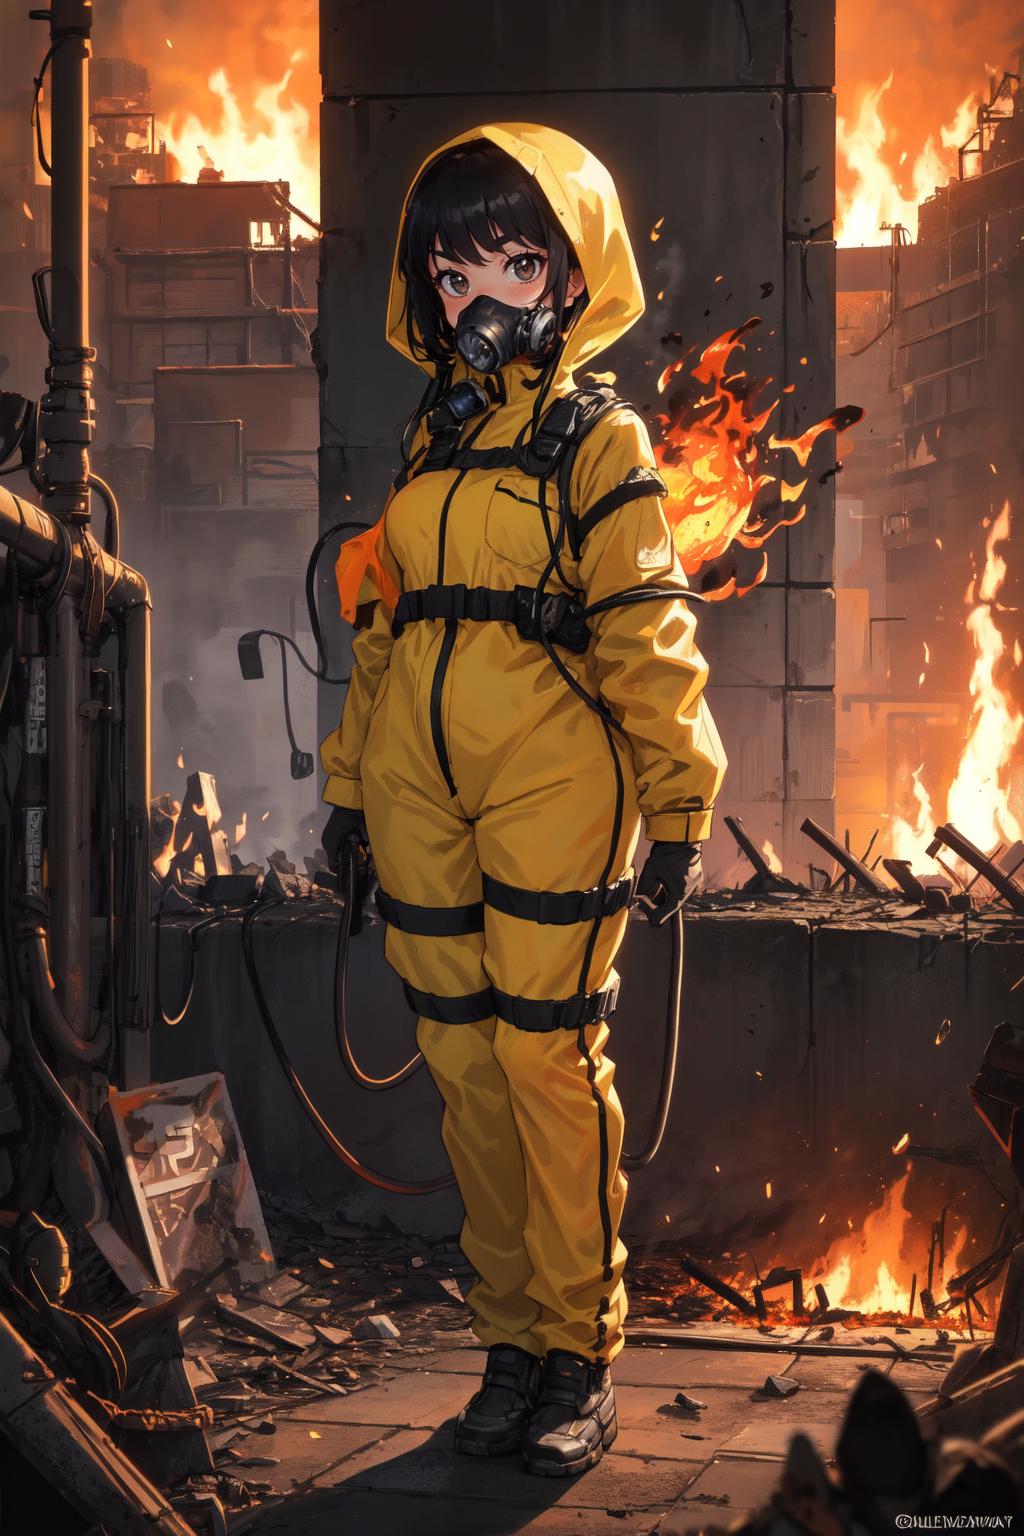 A woman wearing a yellow hazmat suit standing in front of a fire.